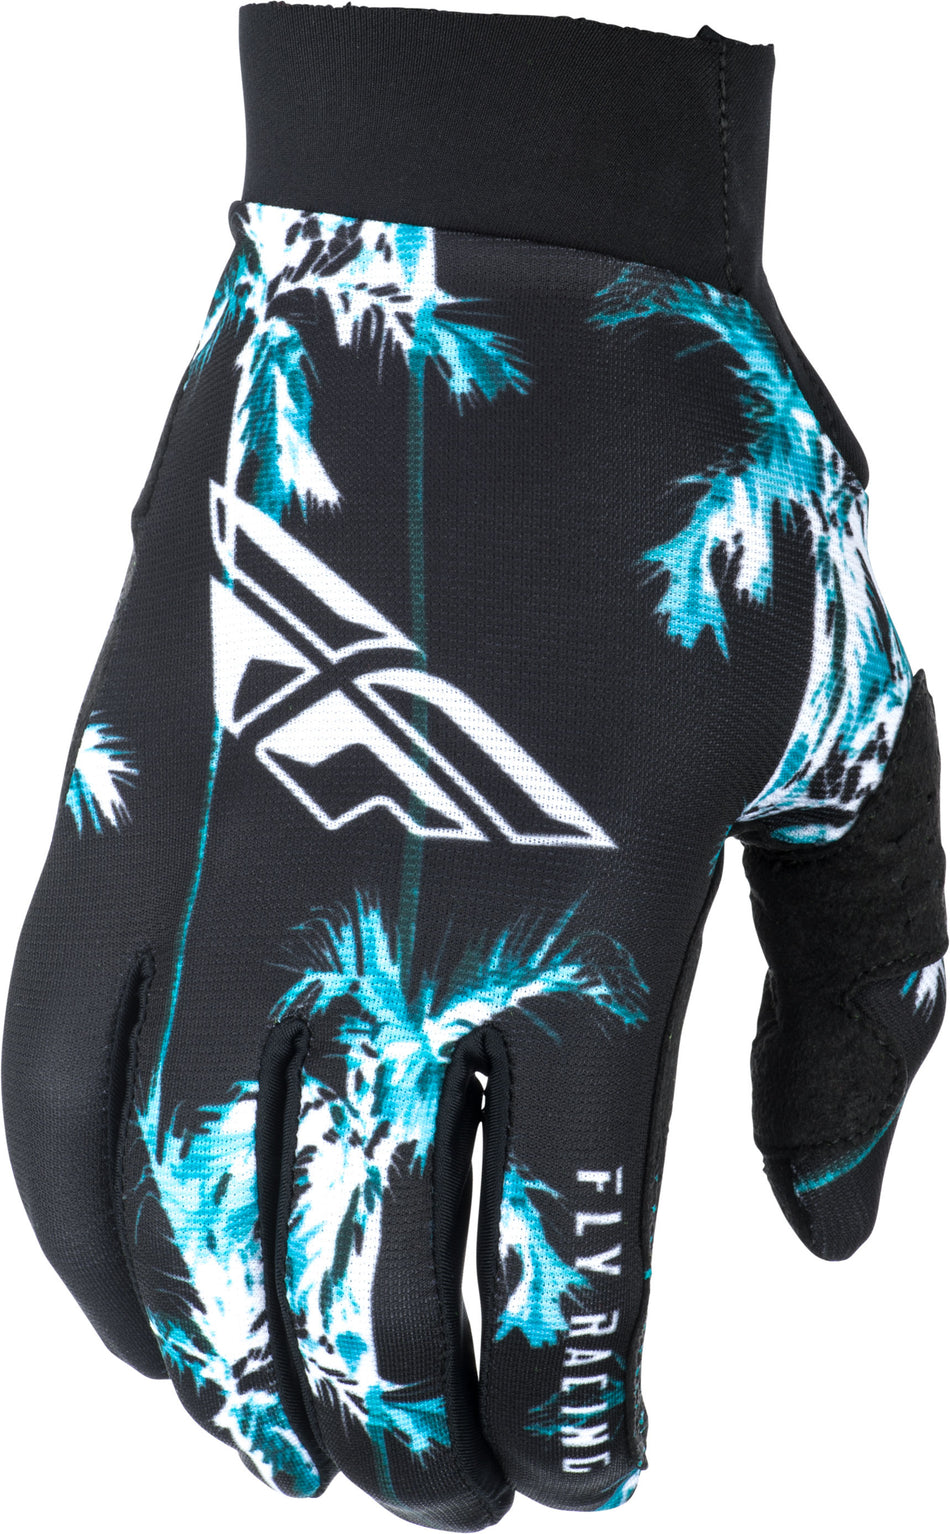 FLY RACING Pro Lite Paradise Gloves Teal/Black Sz 09 372-81909